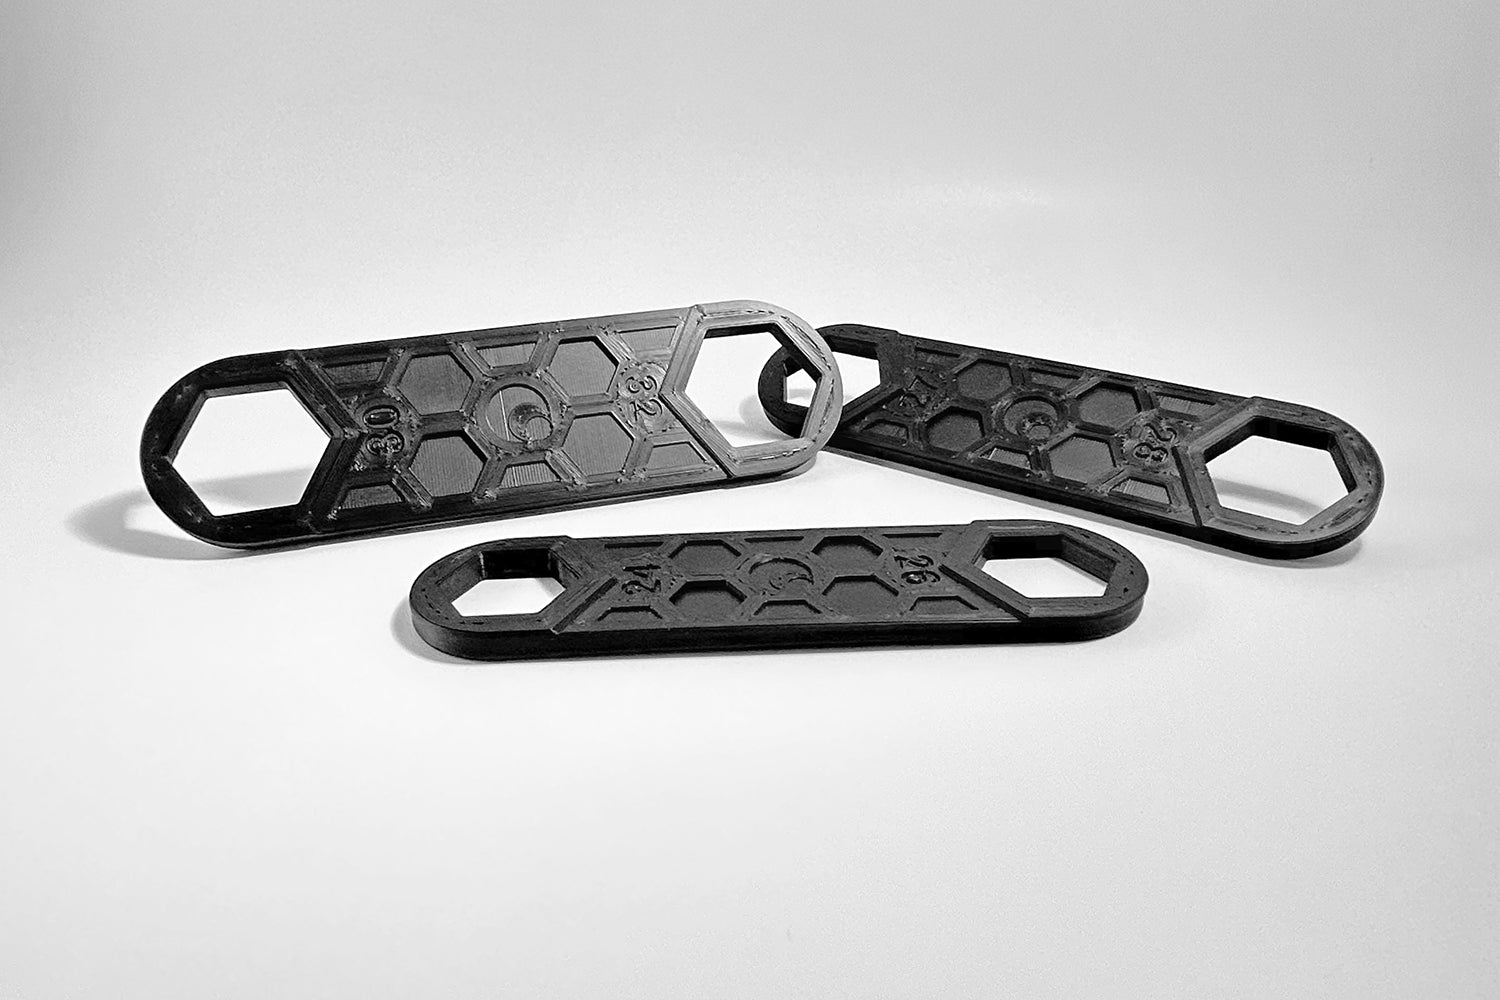 Full Set: Flat Spanners. 3D printed MTB tools made in Canada for the MTB Home Mechanics!